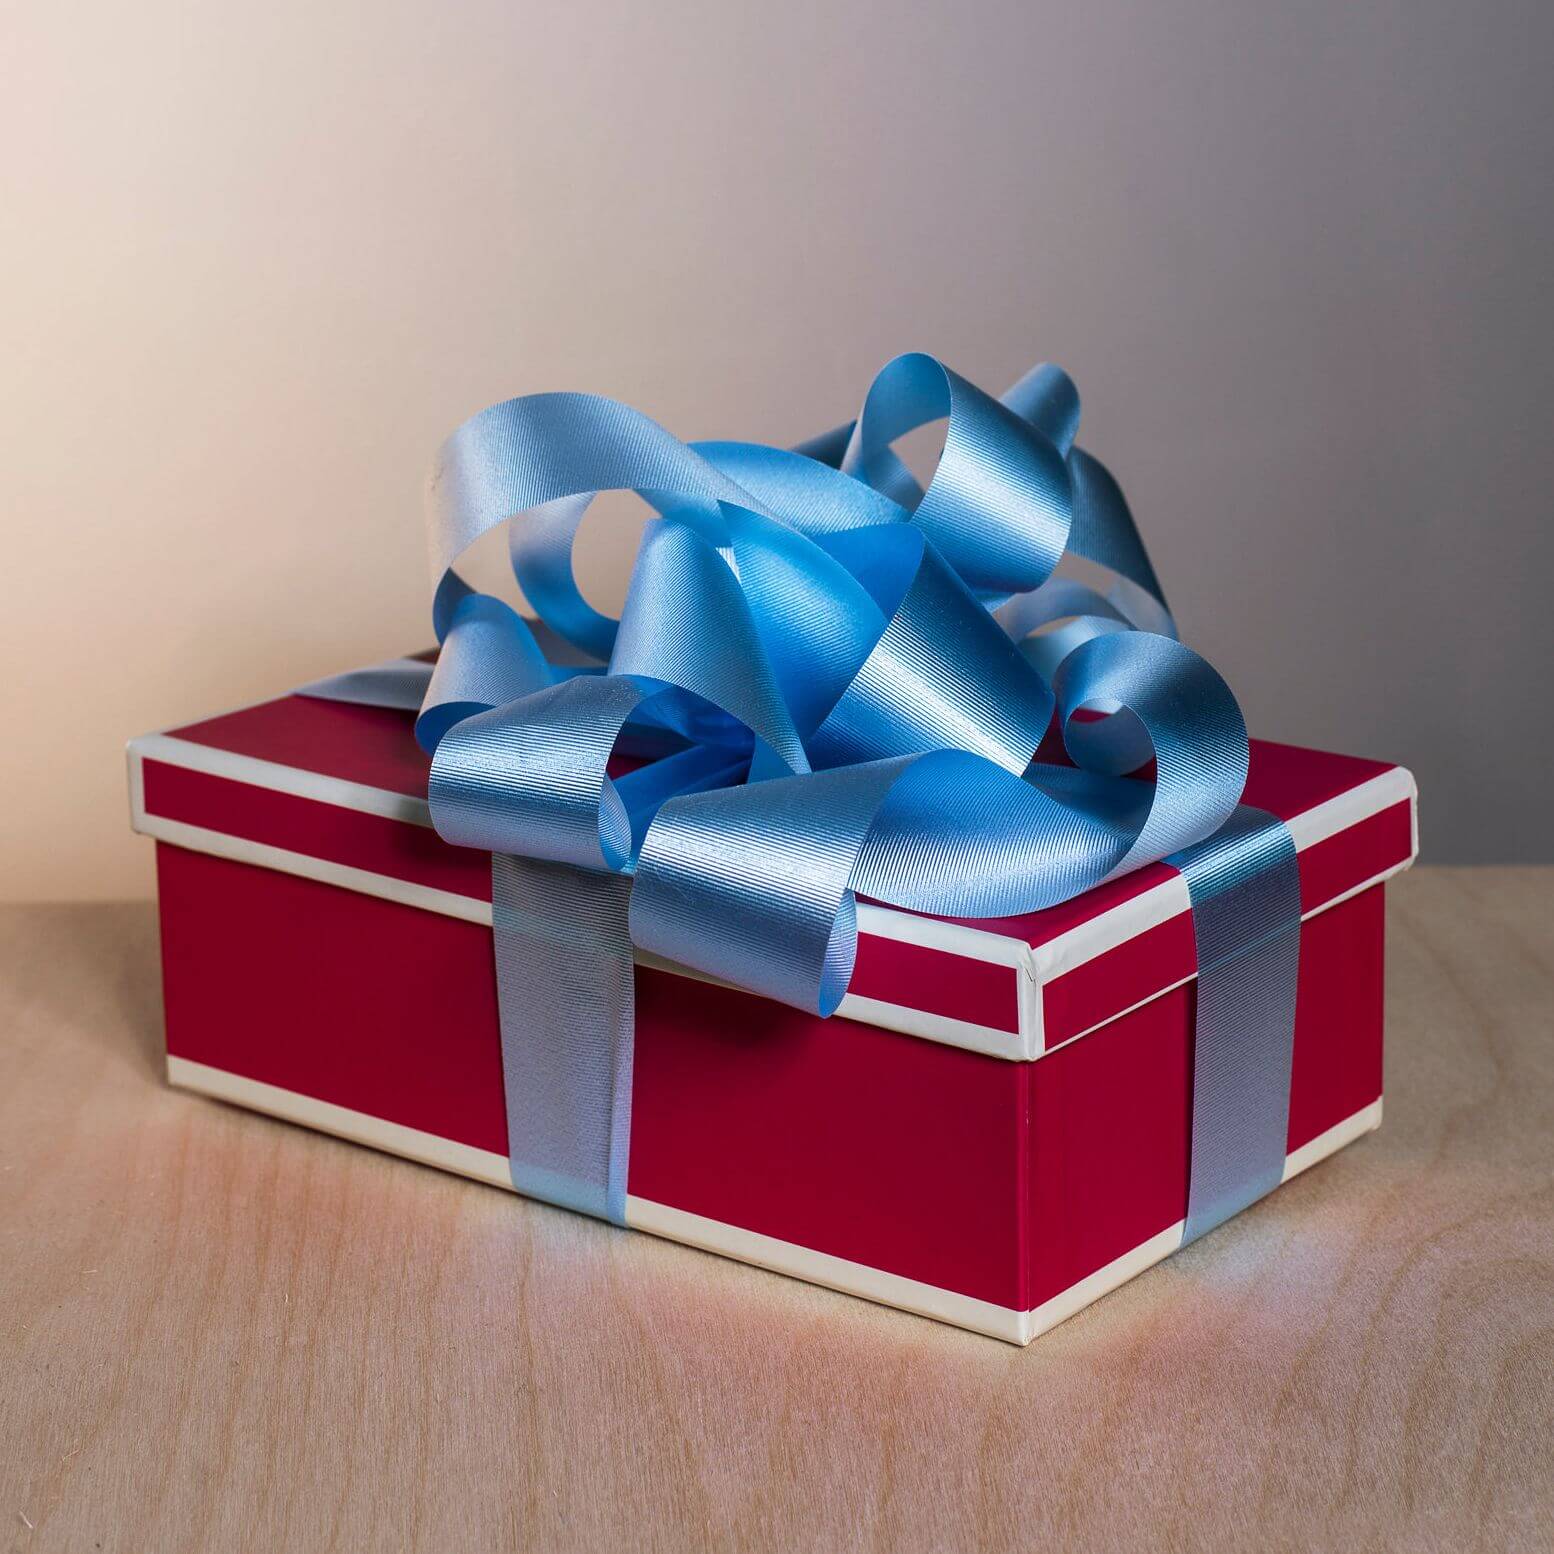 A Christmas present in a red box with blue ribbon.